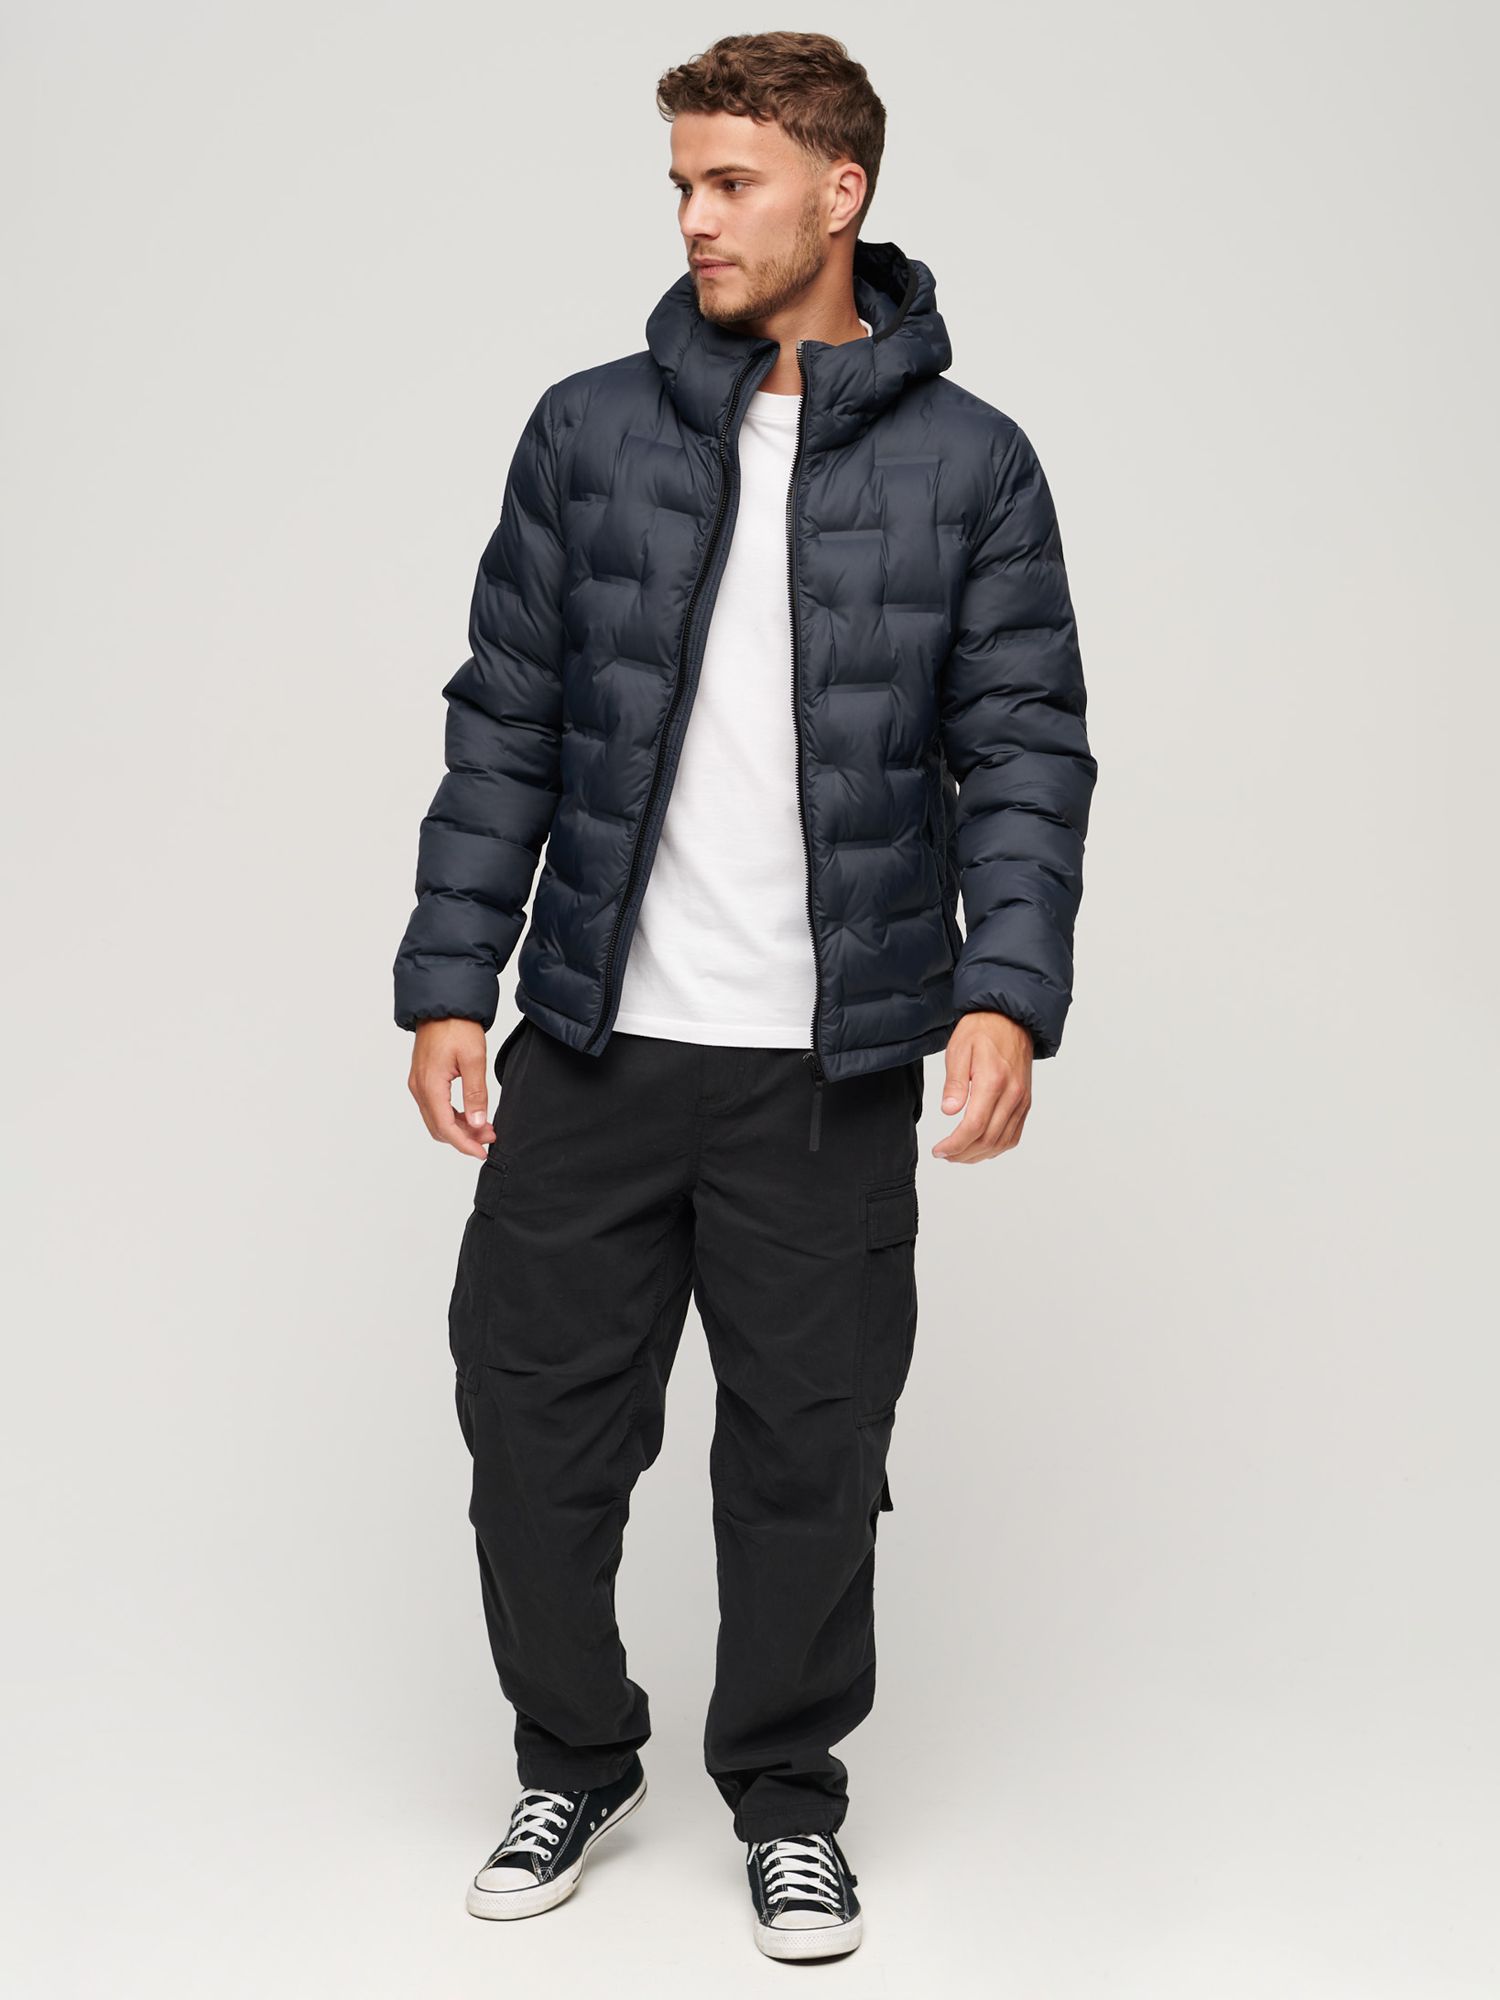 Superdry Short Quilted Puffer Jacket, Eclipse Navy at John Lewis & Partners